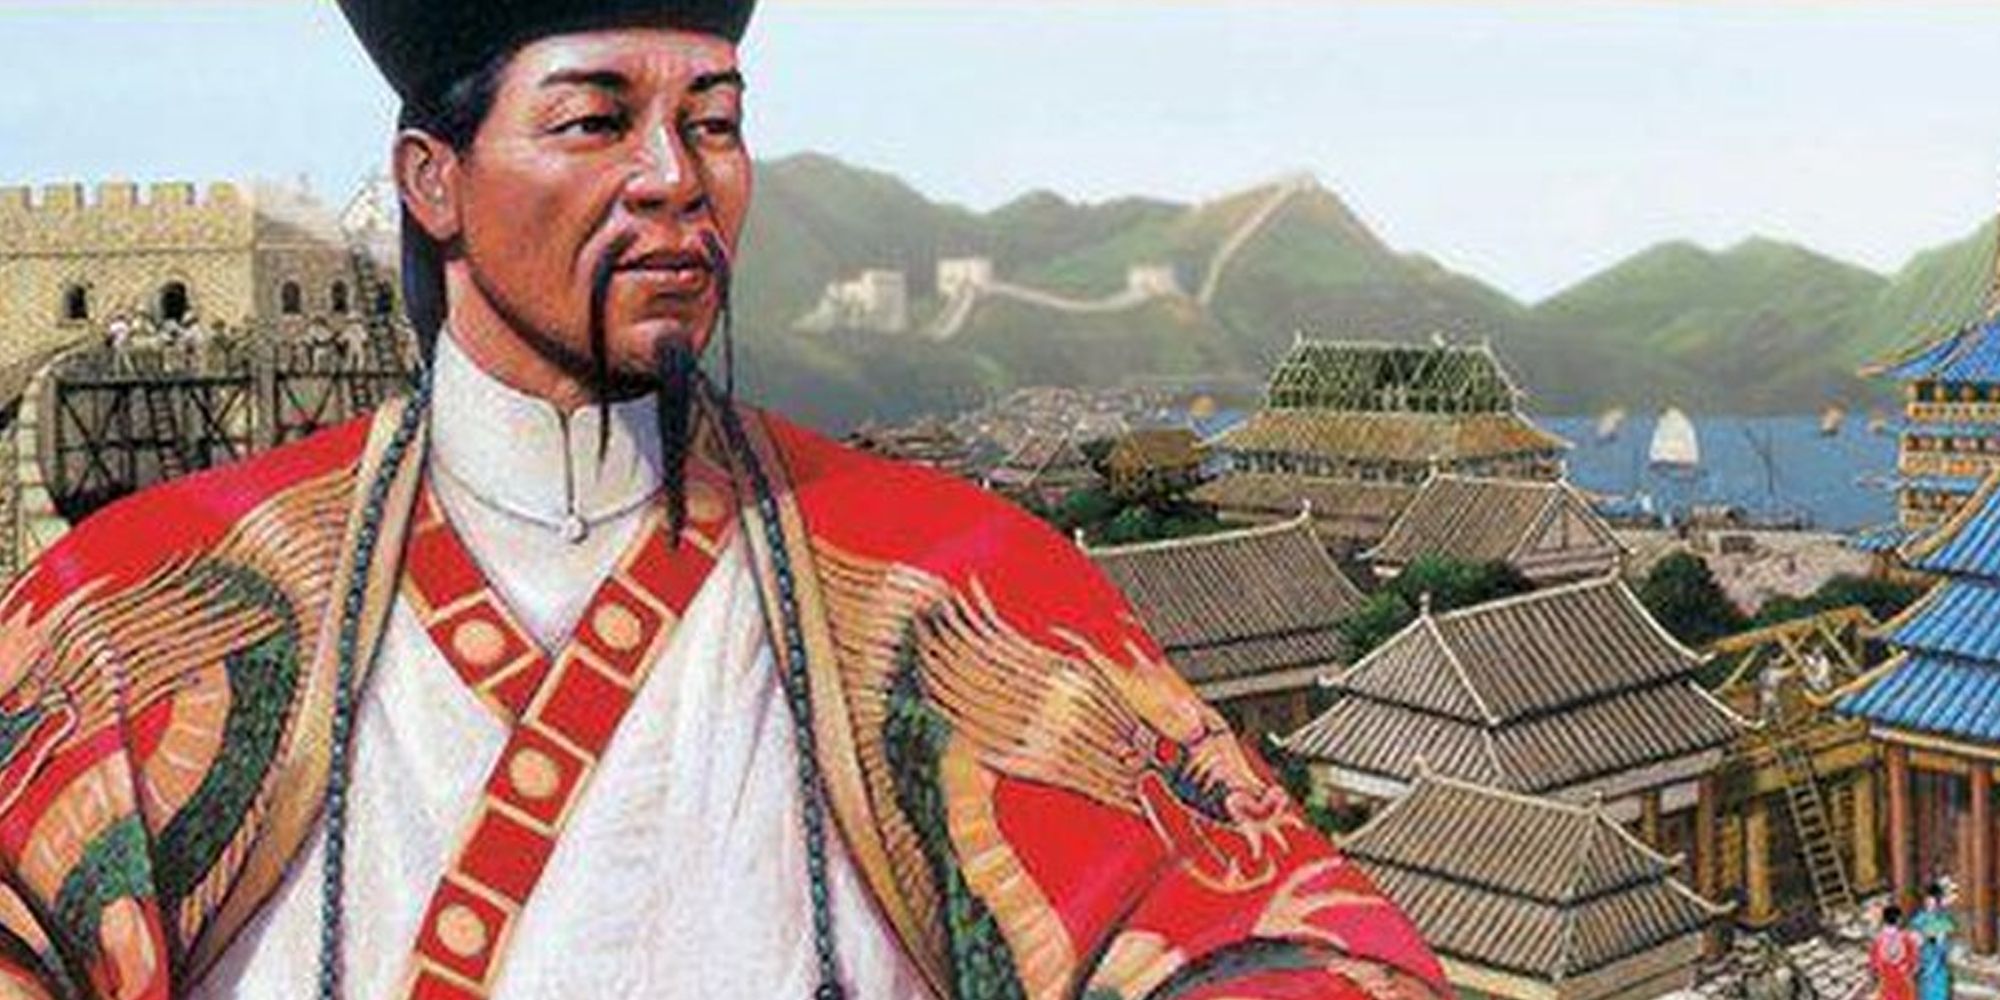 Emperor Rise of the Middle Kingdom key artwork of the emperor overlooking the city.